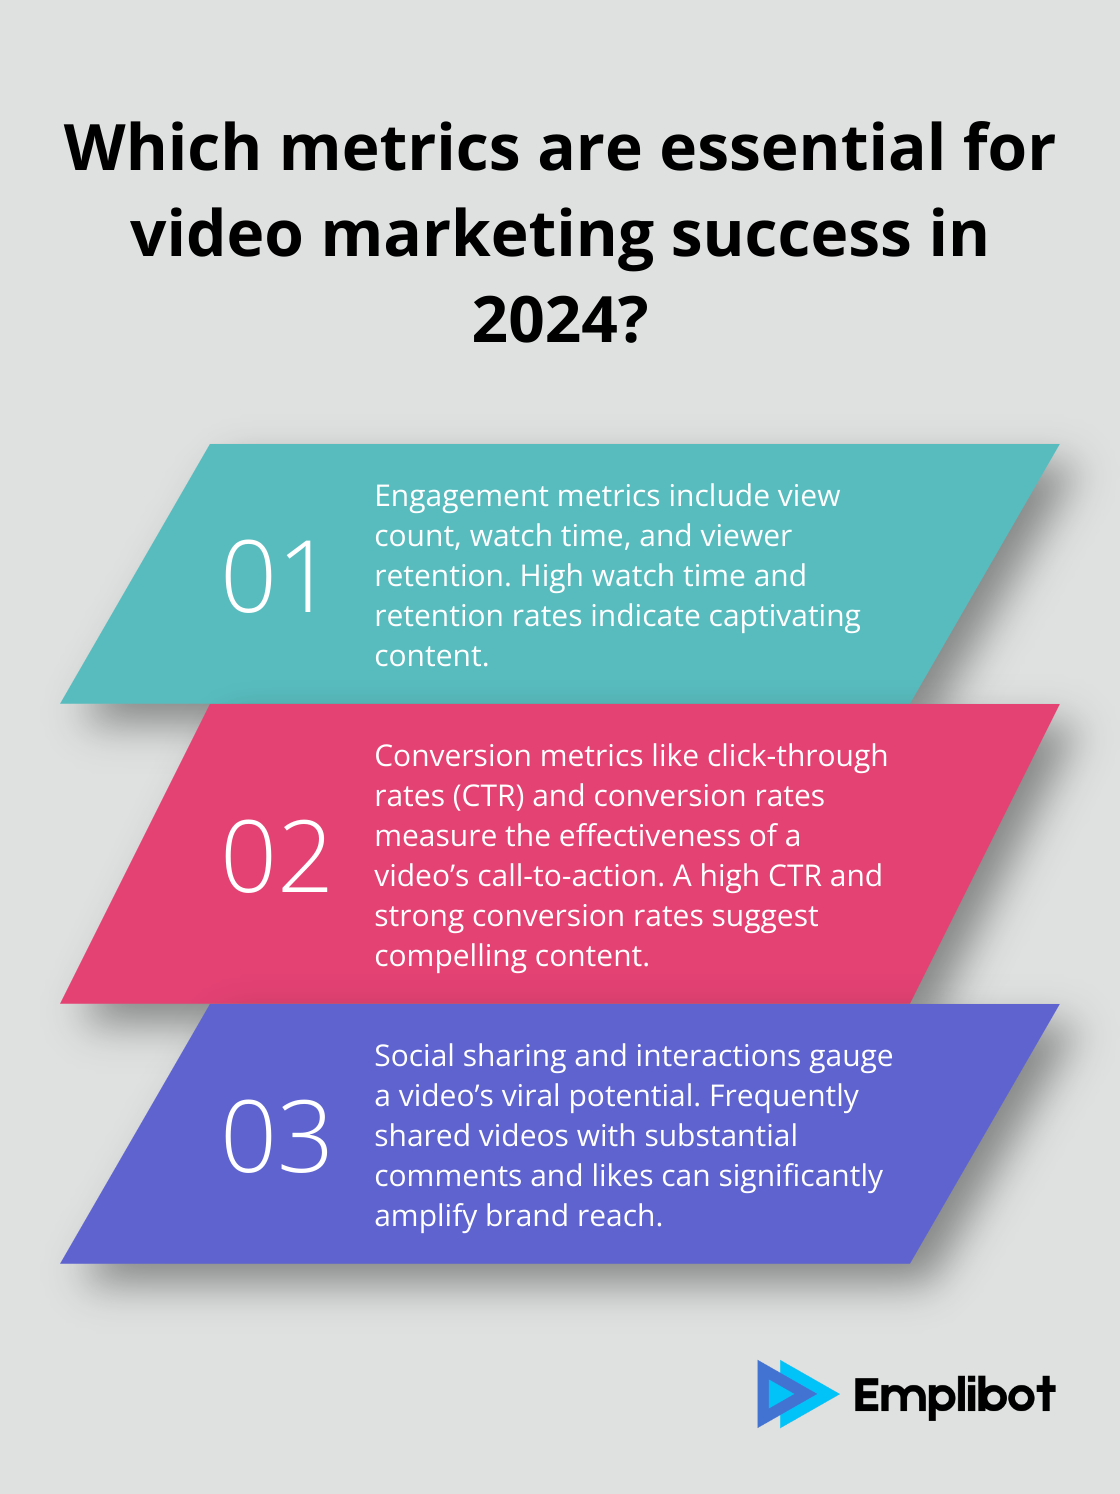 Fact - Which metrics are essential for video marketing success in 2024?